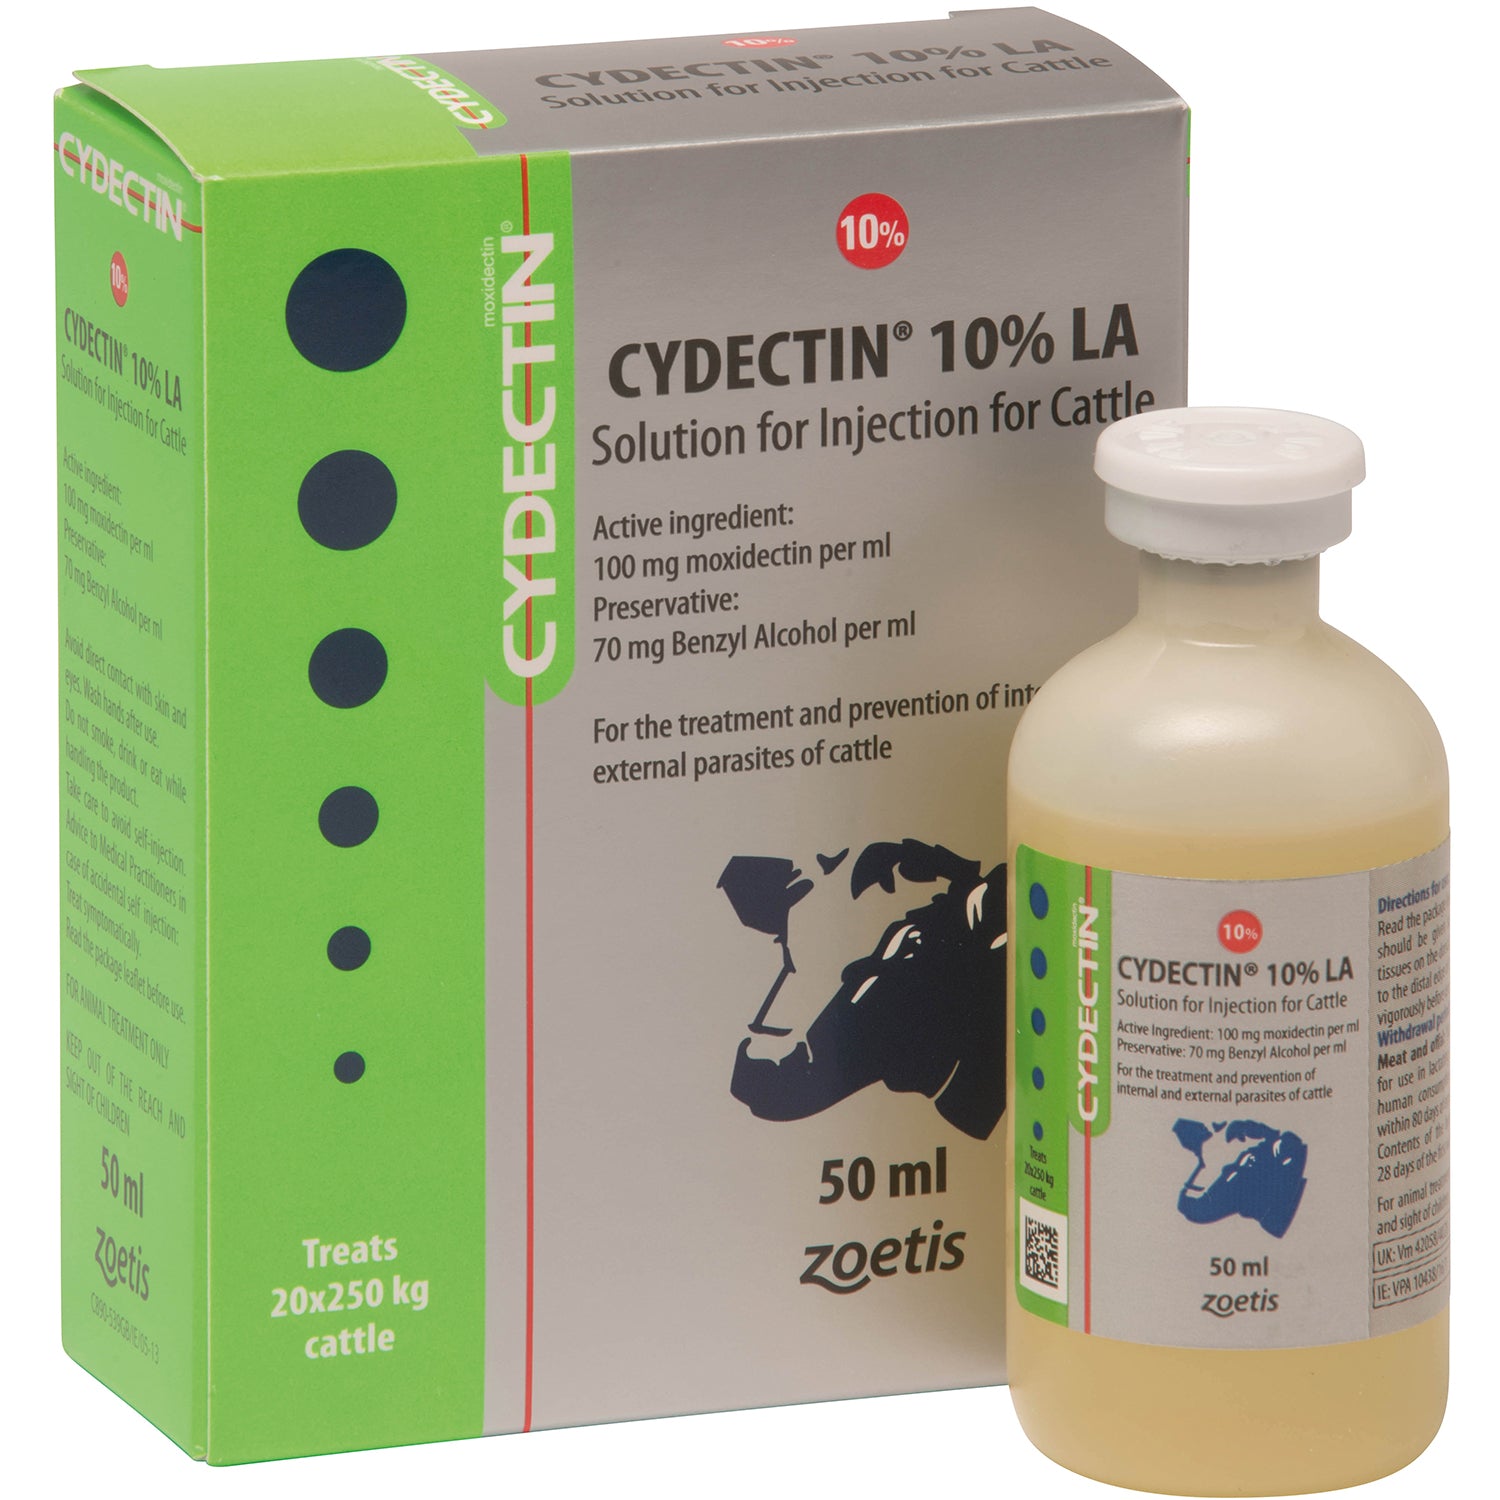 Cydectin 10% LA for Cattle